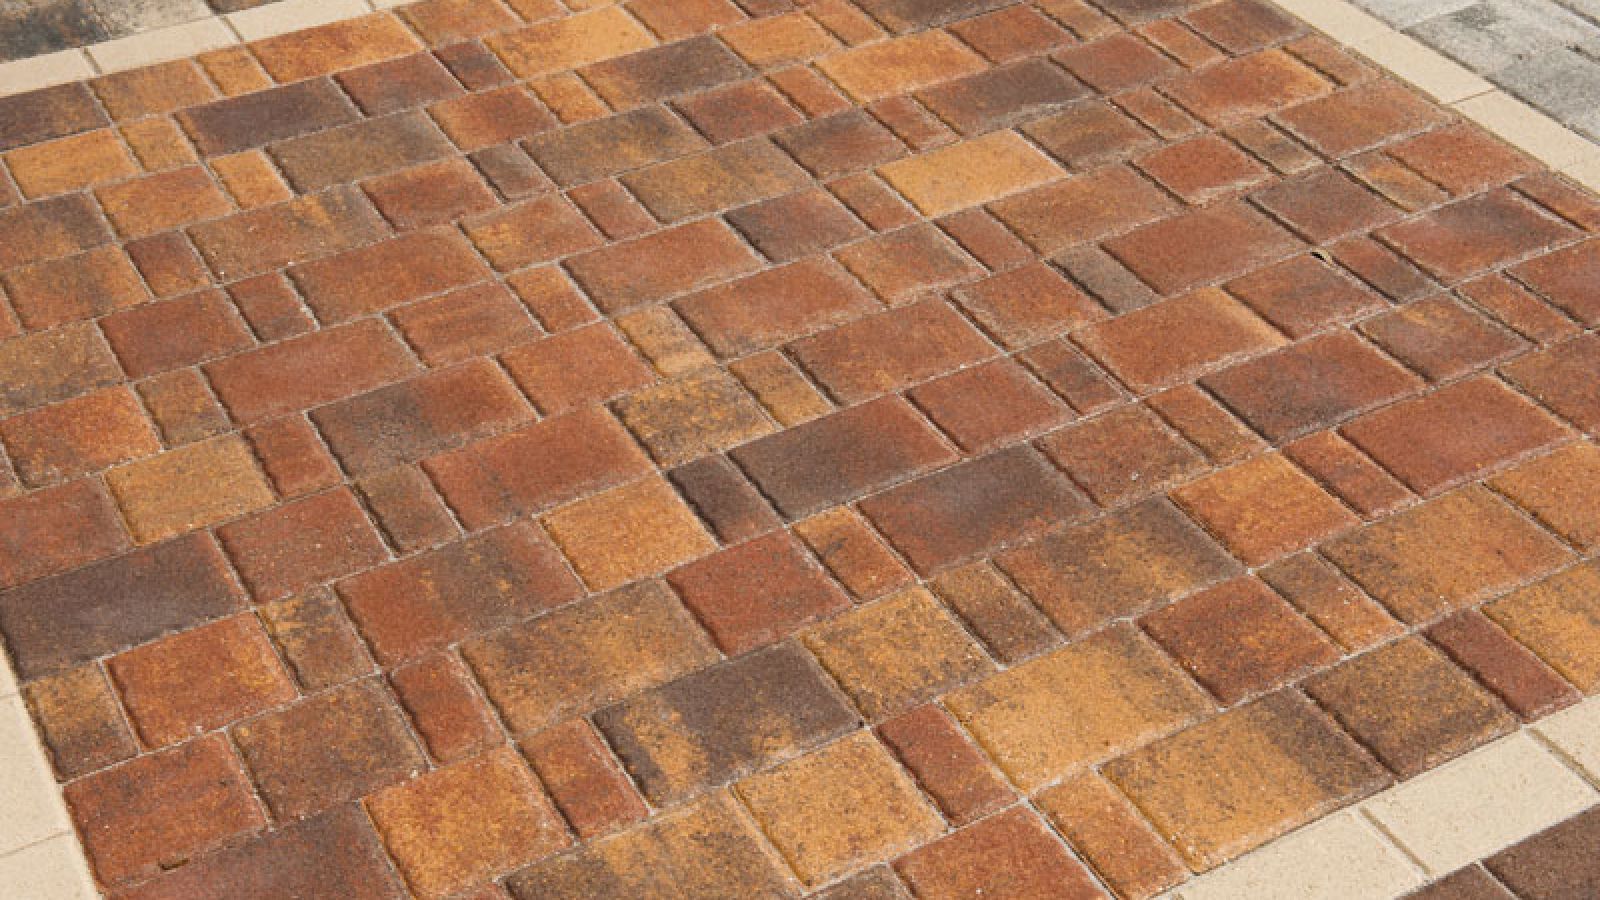 New England Series Pavers by Keystone Hardscapes